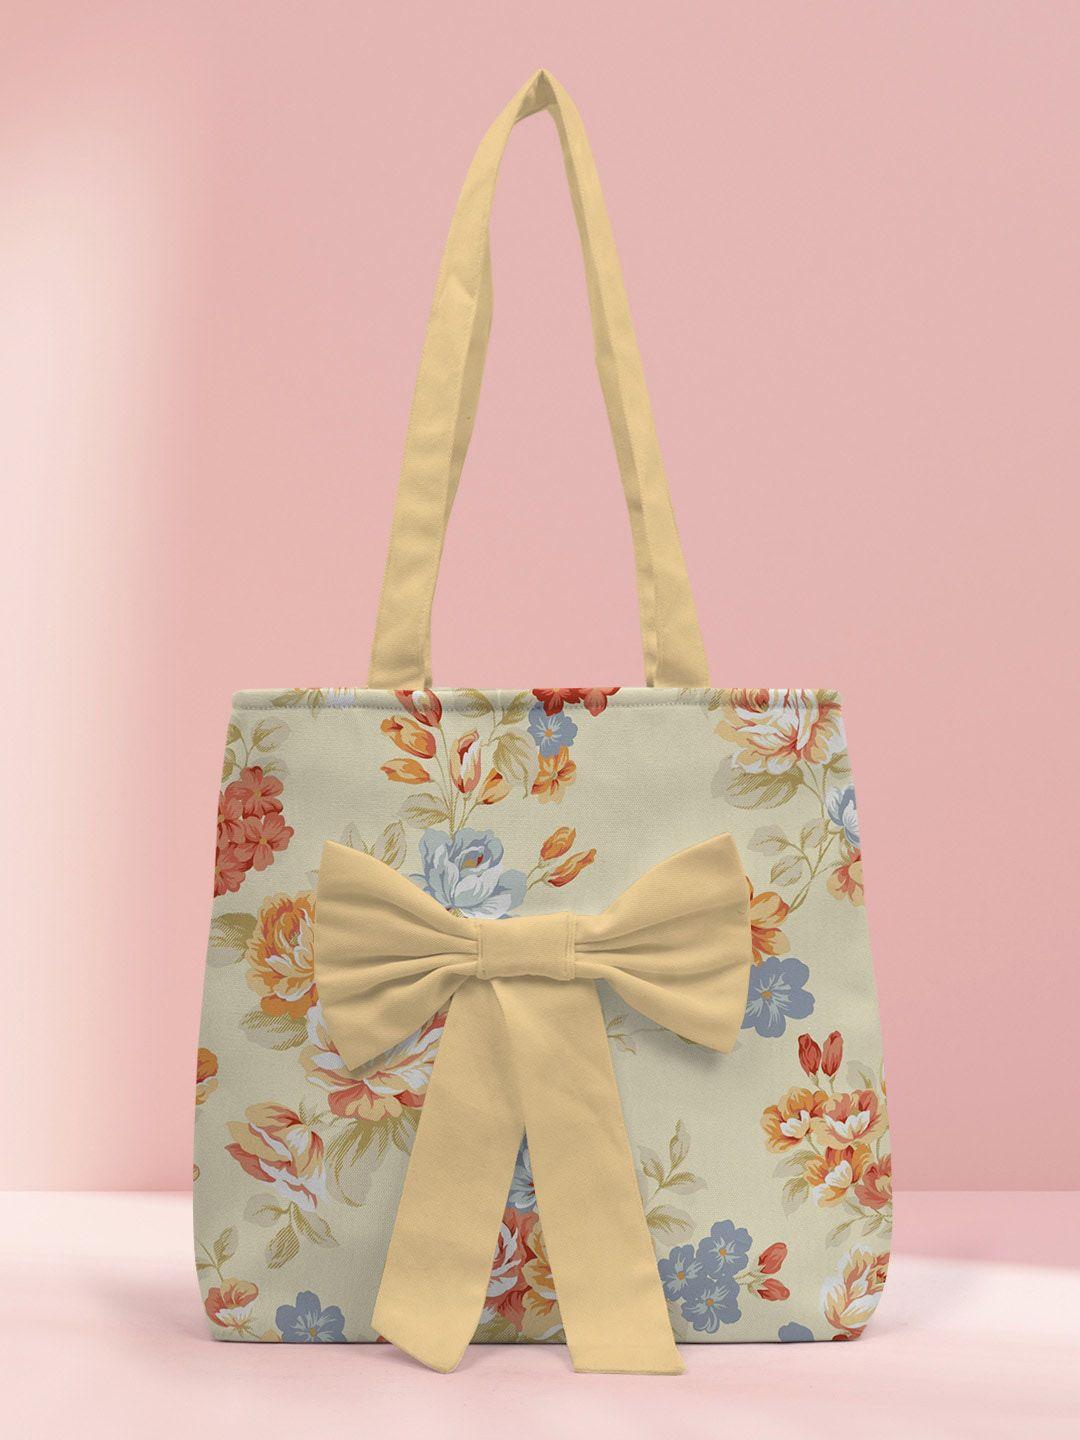 crazy corner women printed shopper tote bag with bow detail